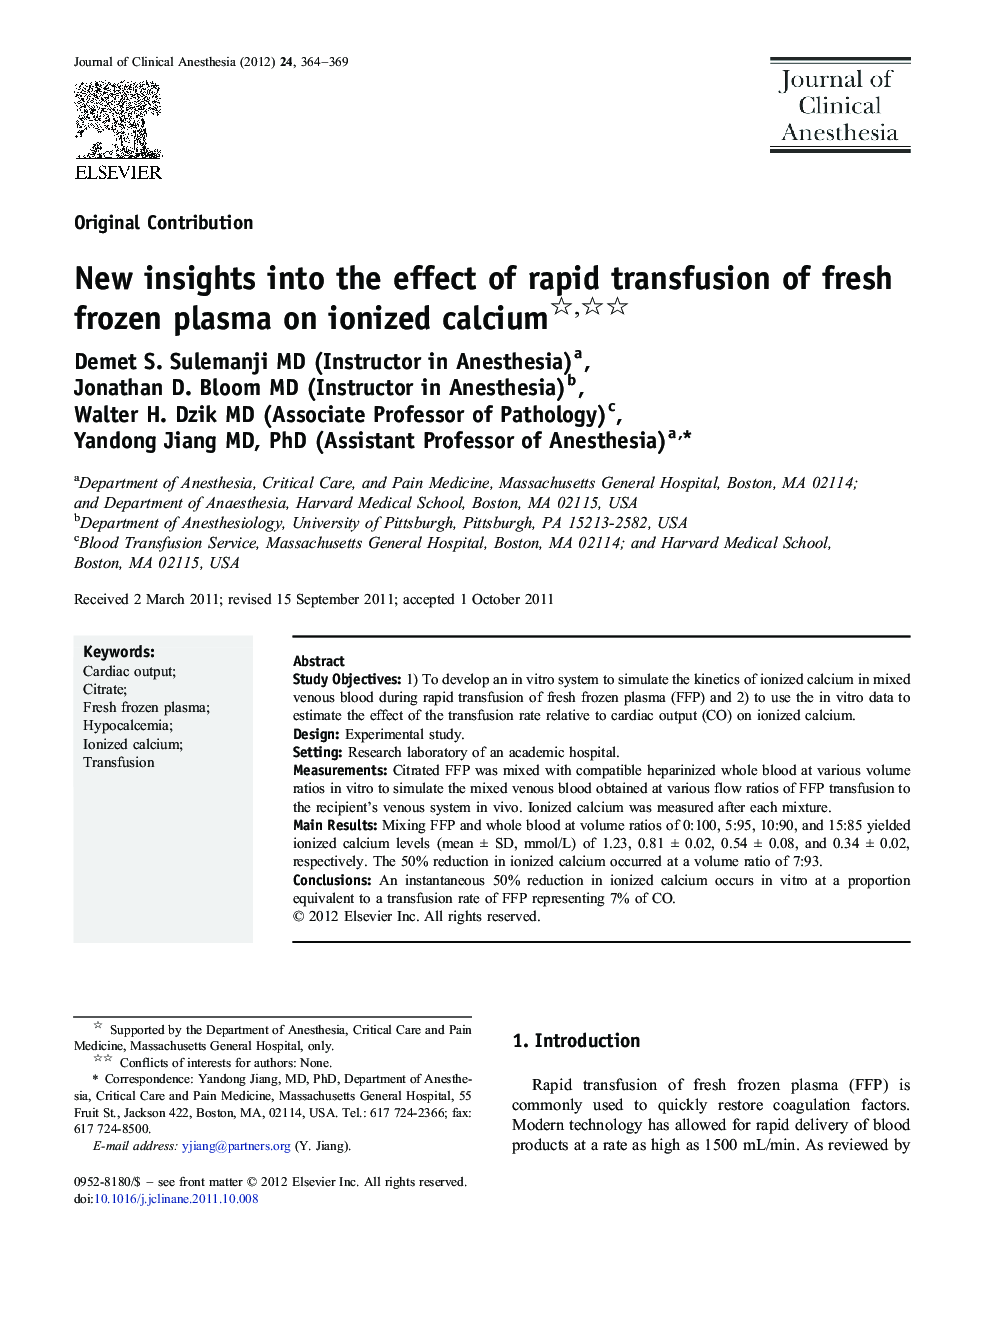 New insights into the effect of rapid transfusion of fresh frozen plasma on ionized calcium 